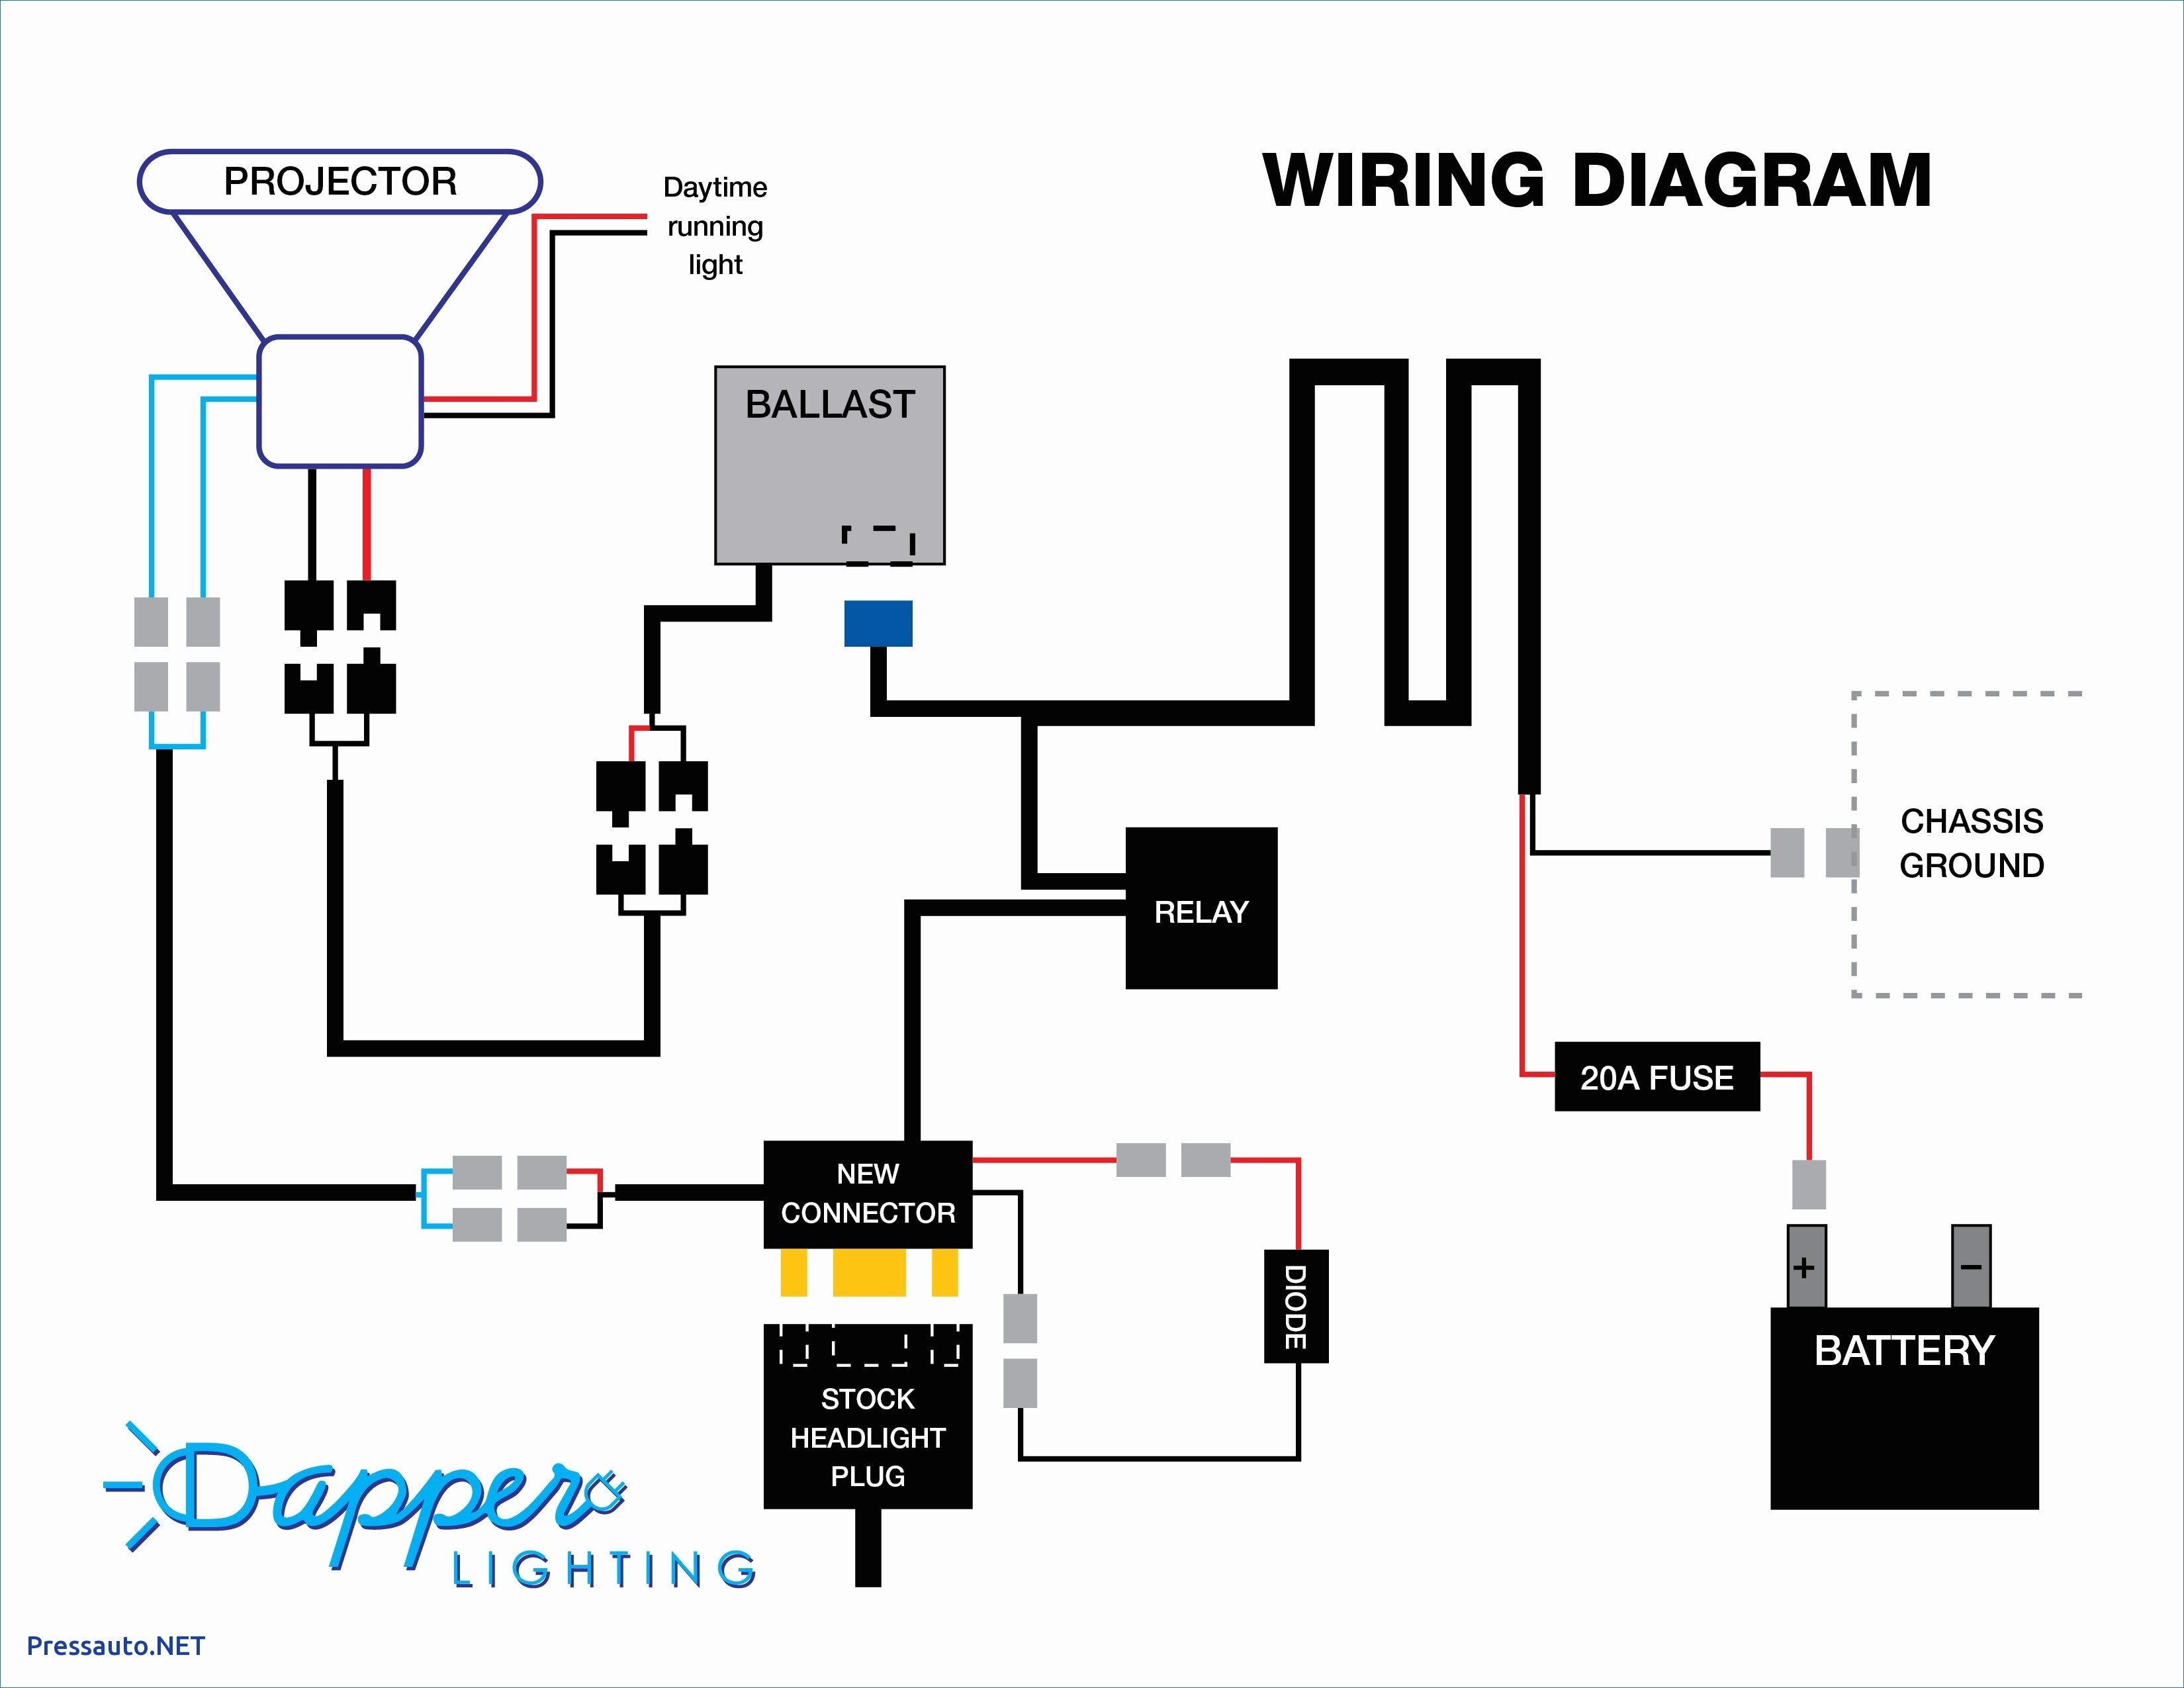 Full Size of Wiring Diagram How To Wire Trailer Lights 4 Way Diagram Inspirational Lovely